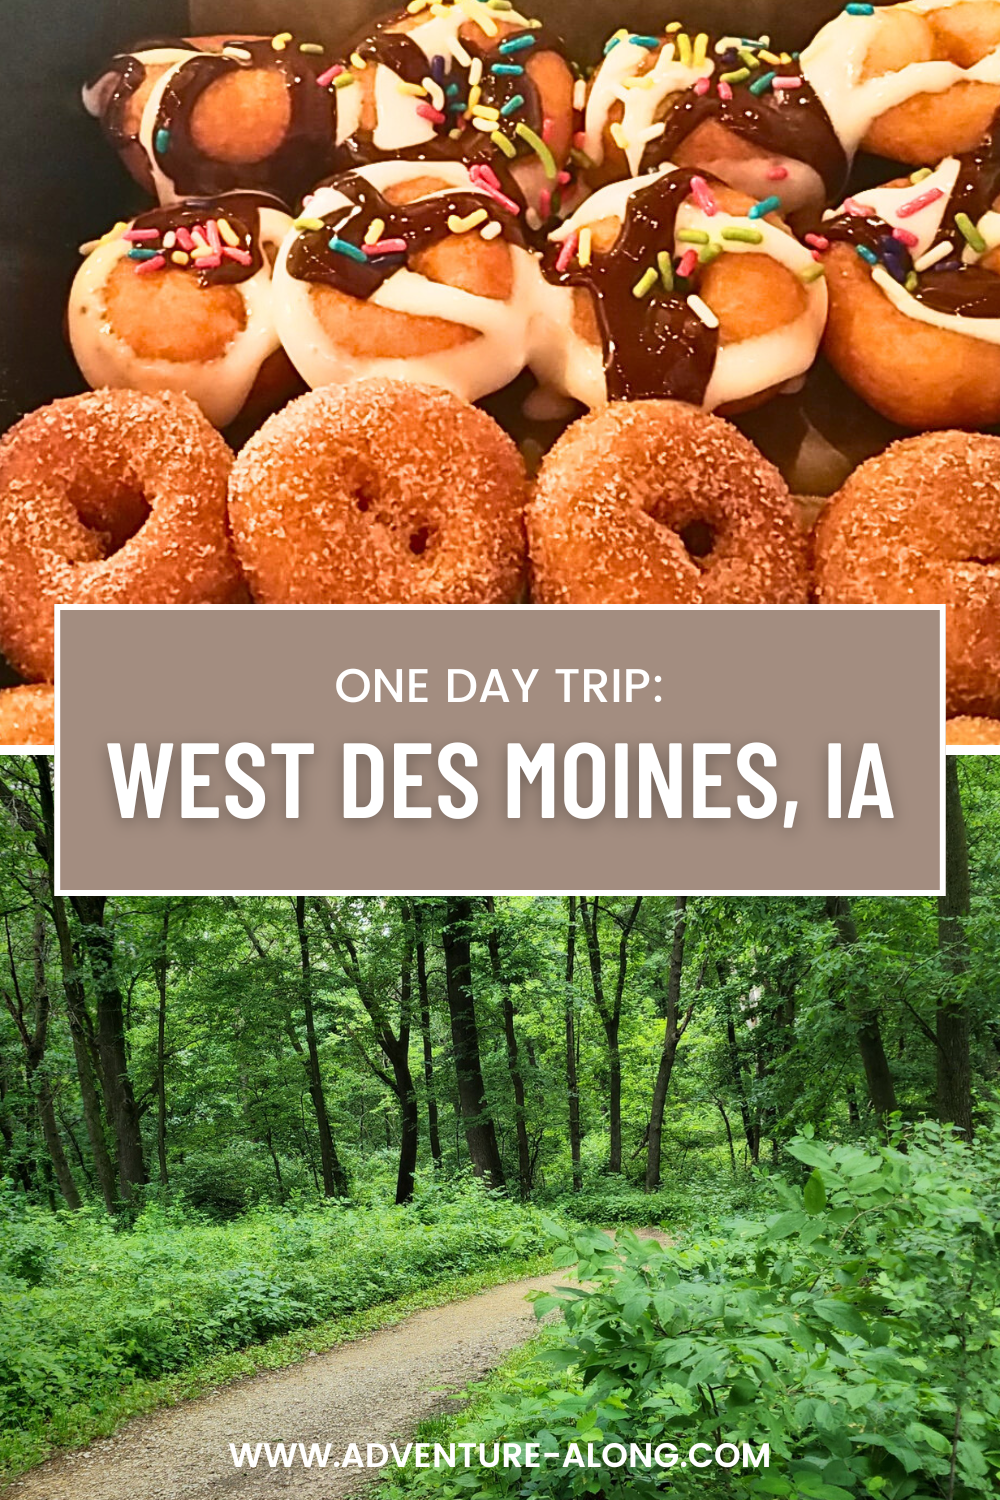 One Day Trip: West Des Moines